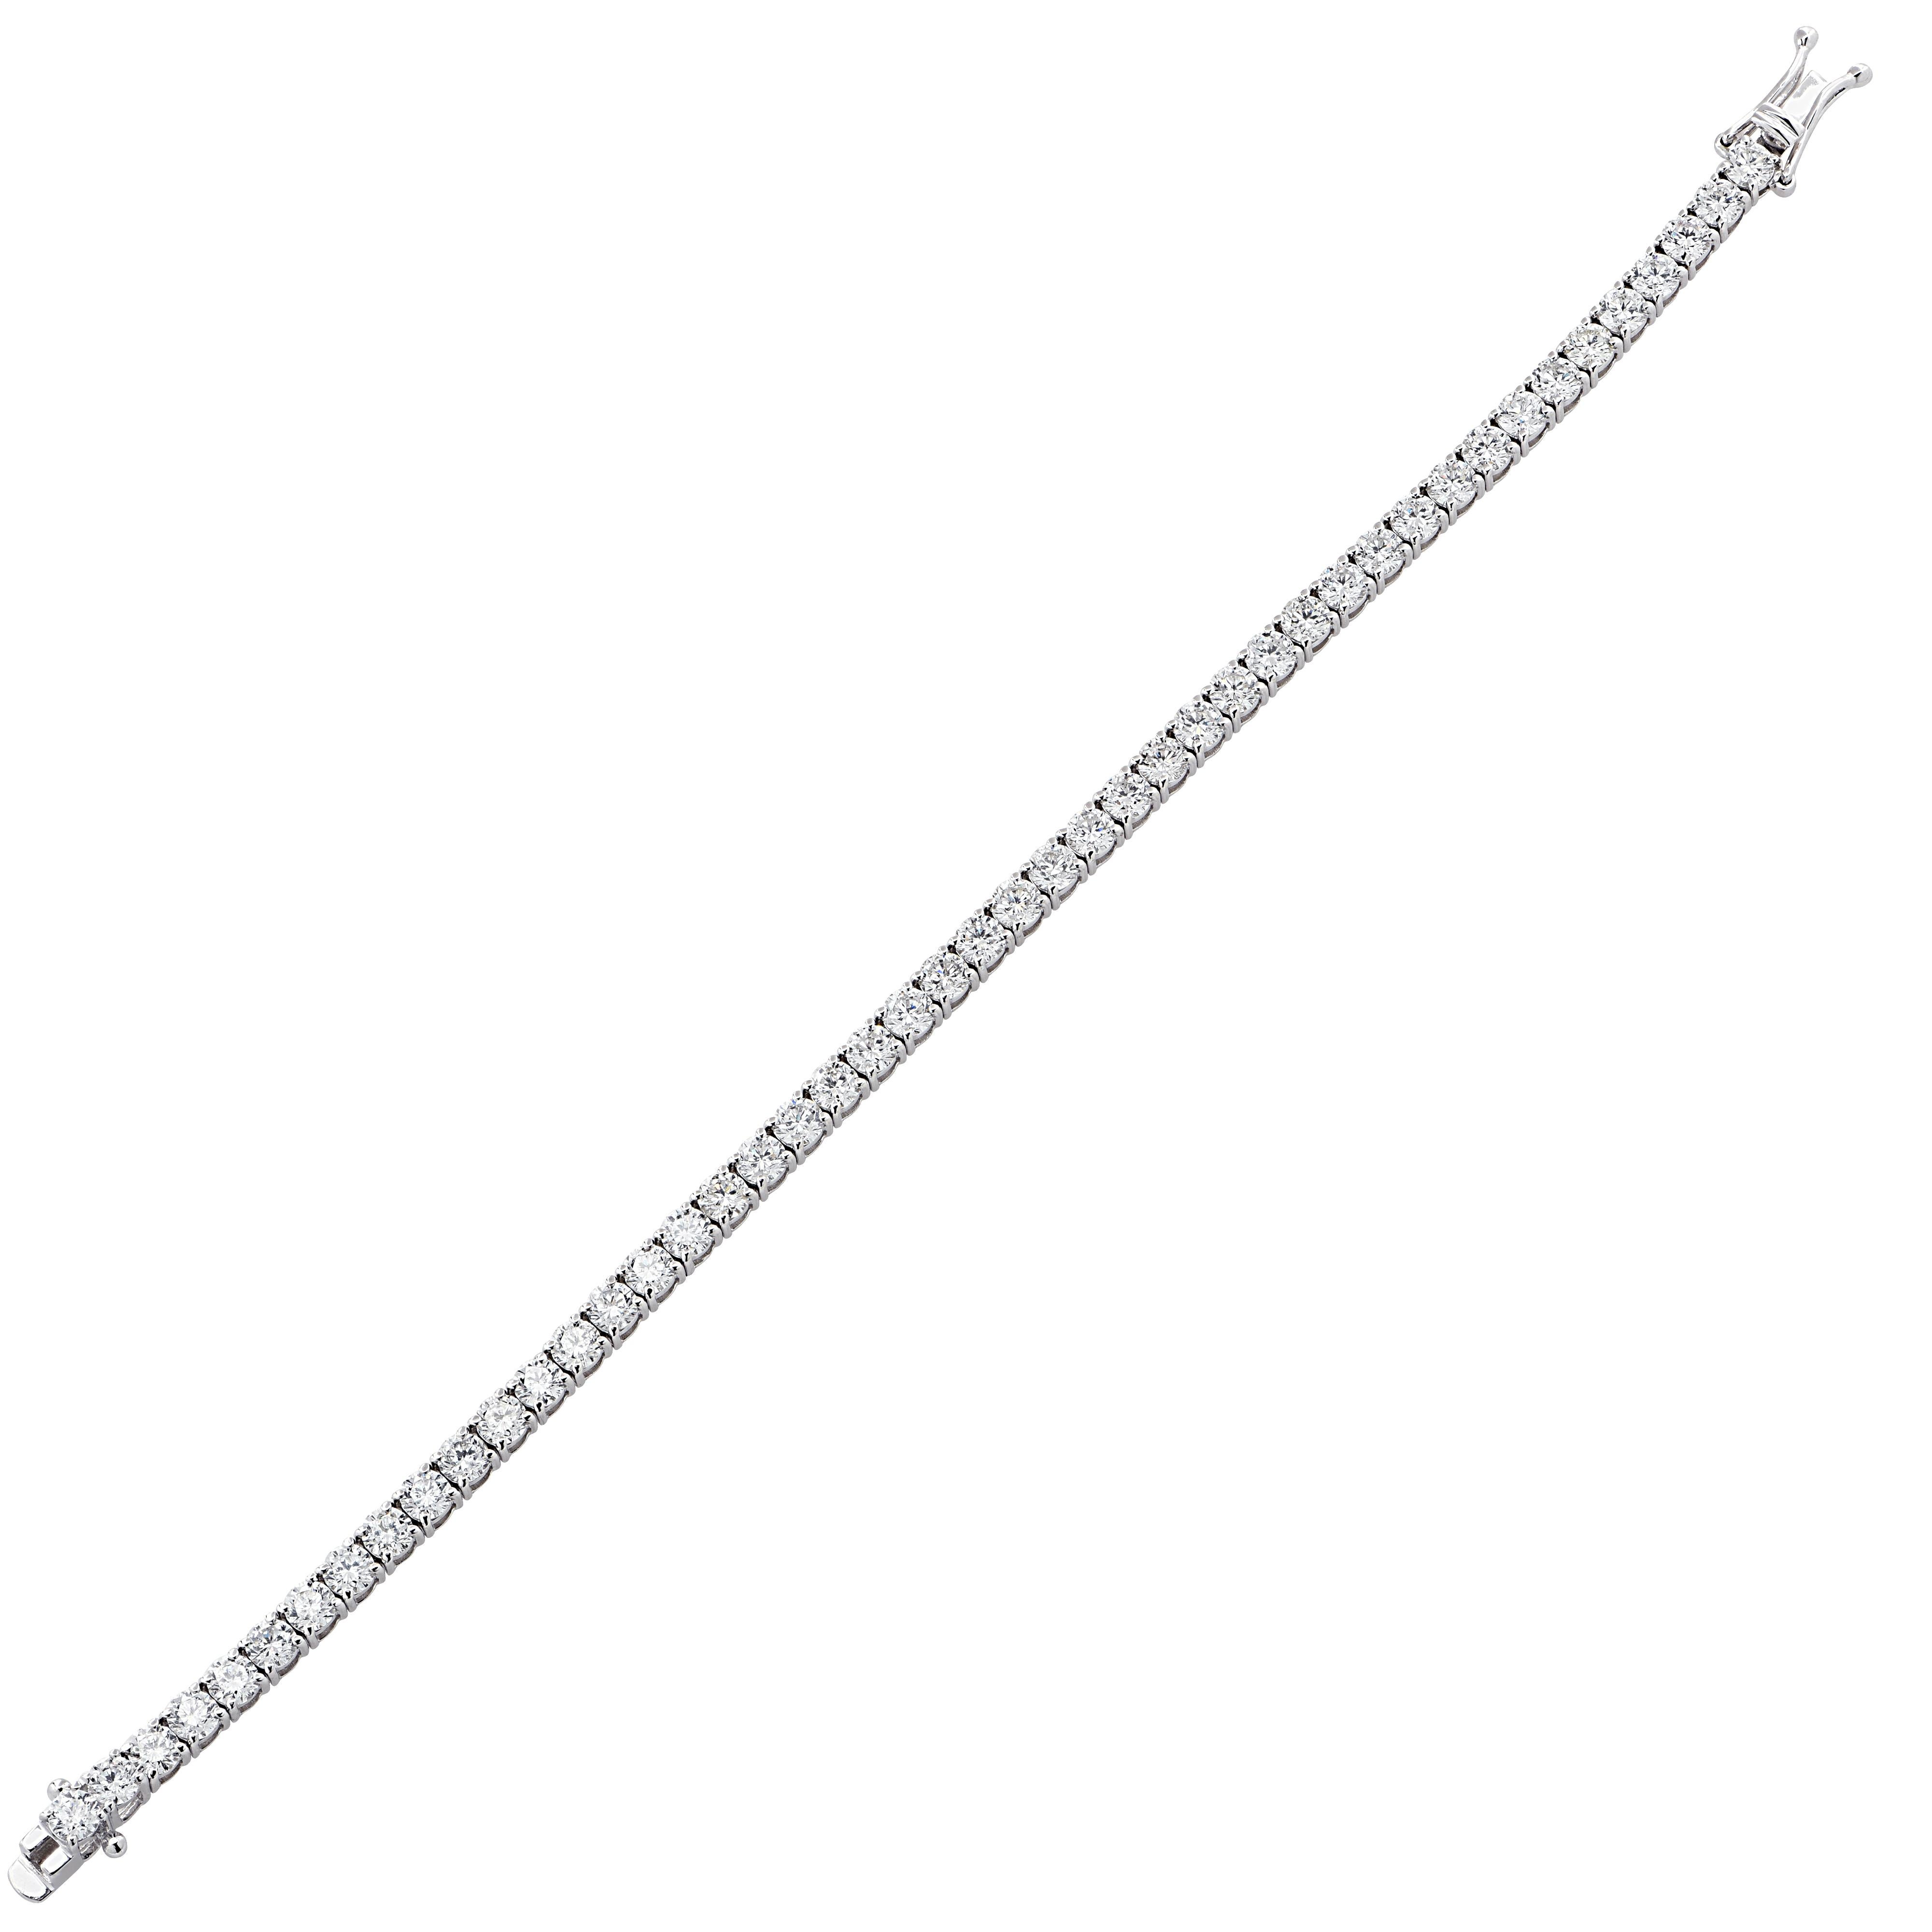 Exquisite Vivid Diamonds diamond tennis bracelet crafted in 18 karat white gold, showcasing 57 stunning round brilliant cut diamonds weighing approximately 6.36 carats total, G-I color, SI clarity. Each diamond is carefully selected, perfectly